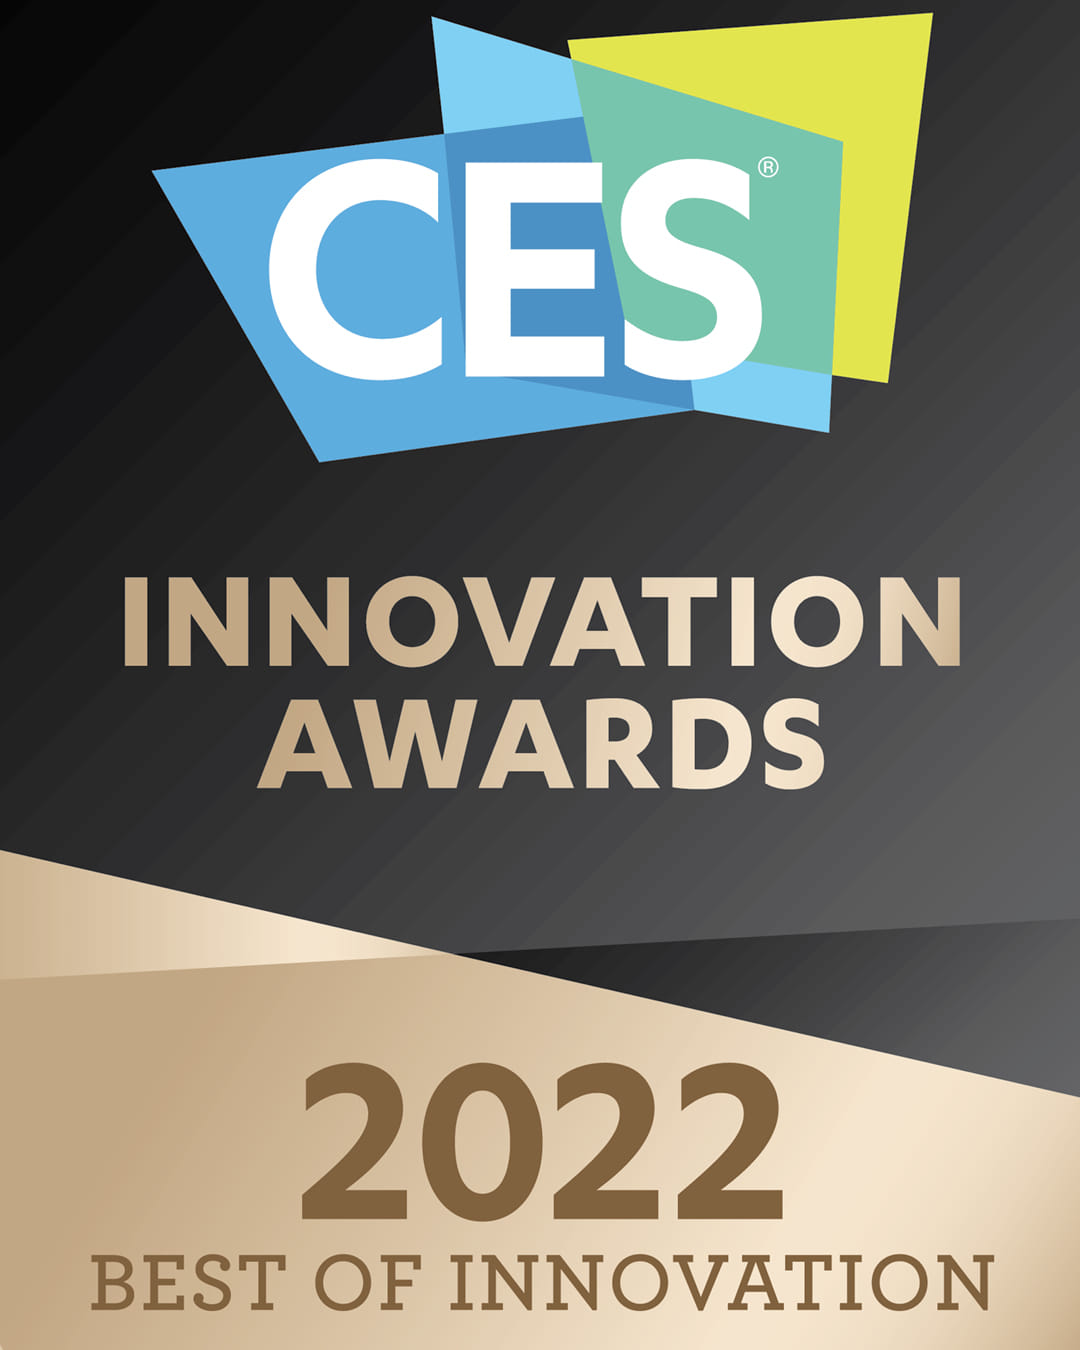 Poygon at CES 2022 - Best Of Innovation award